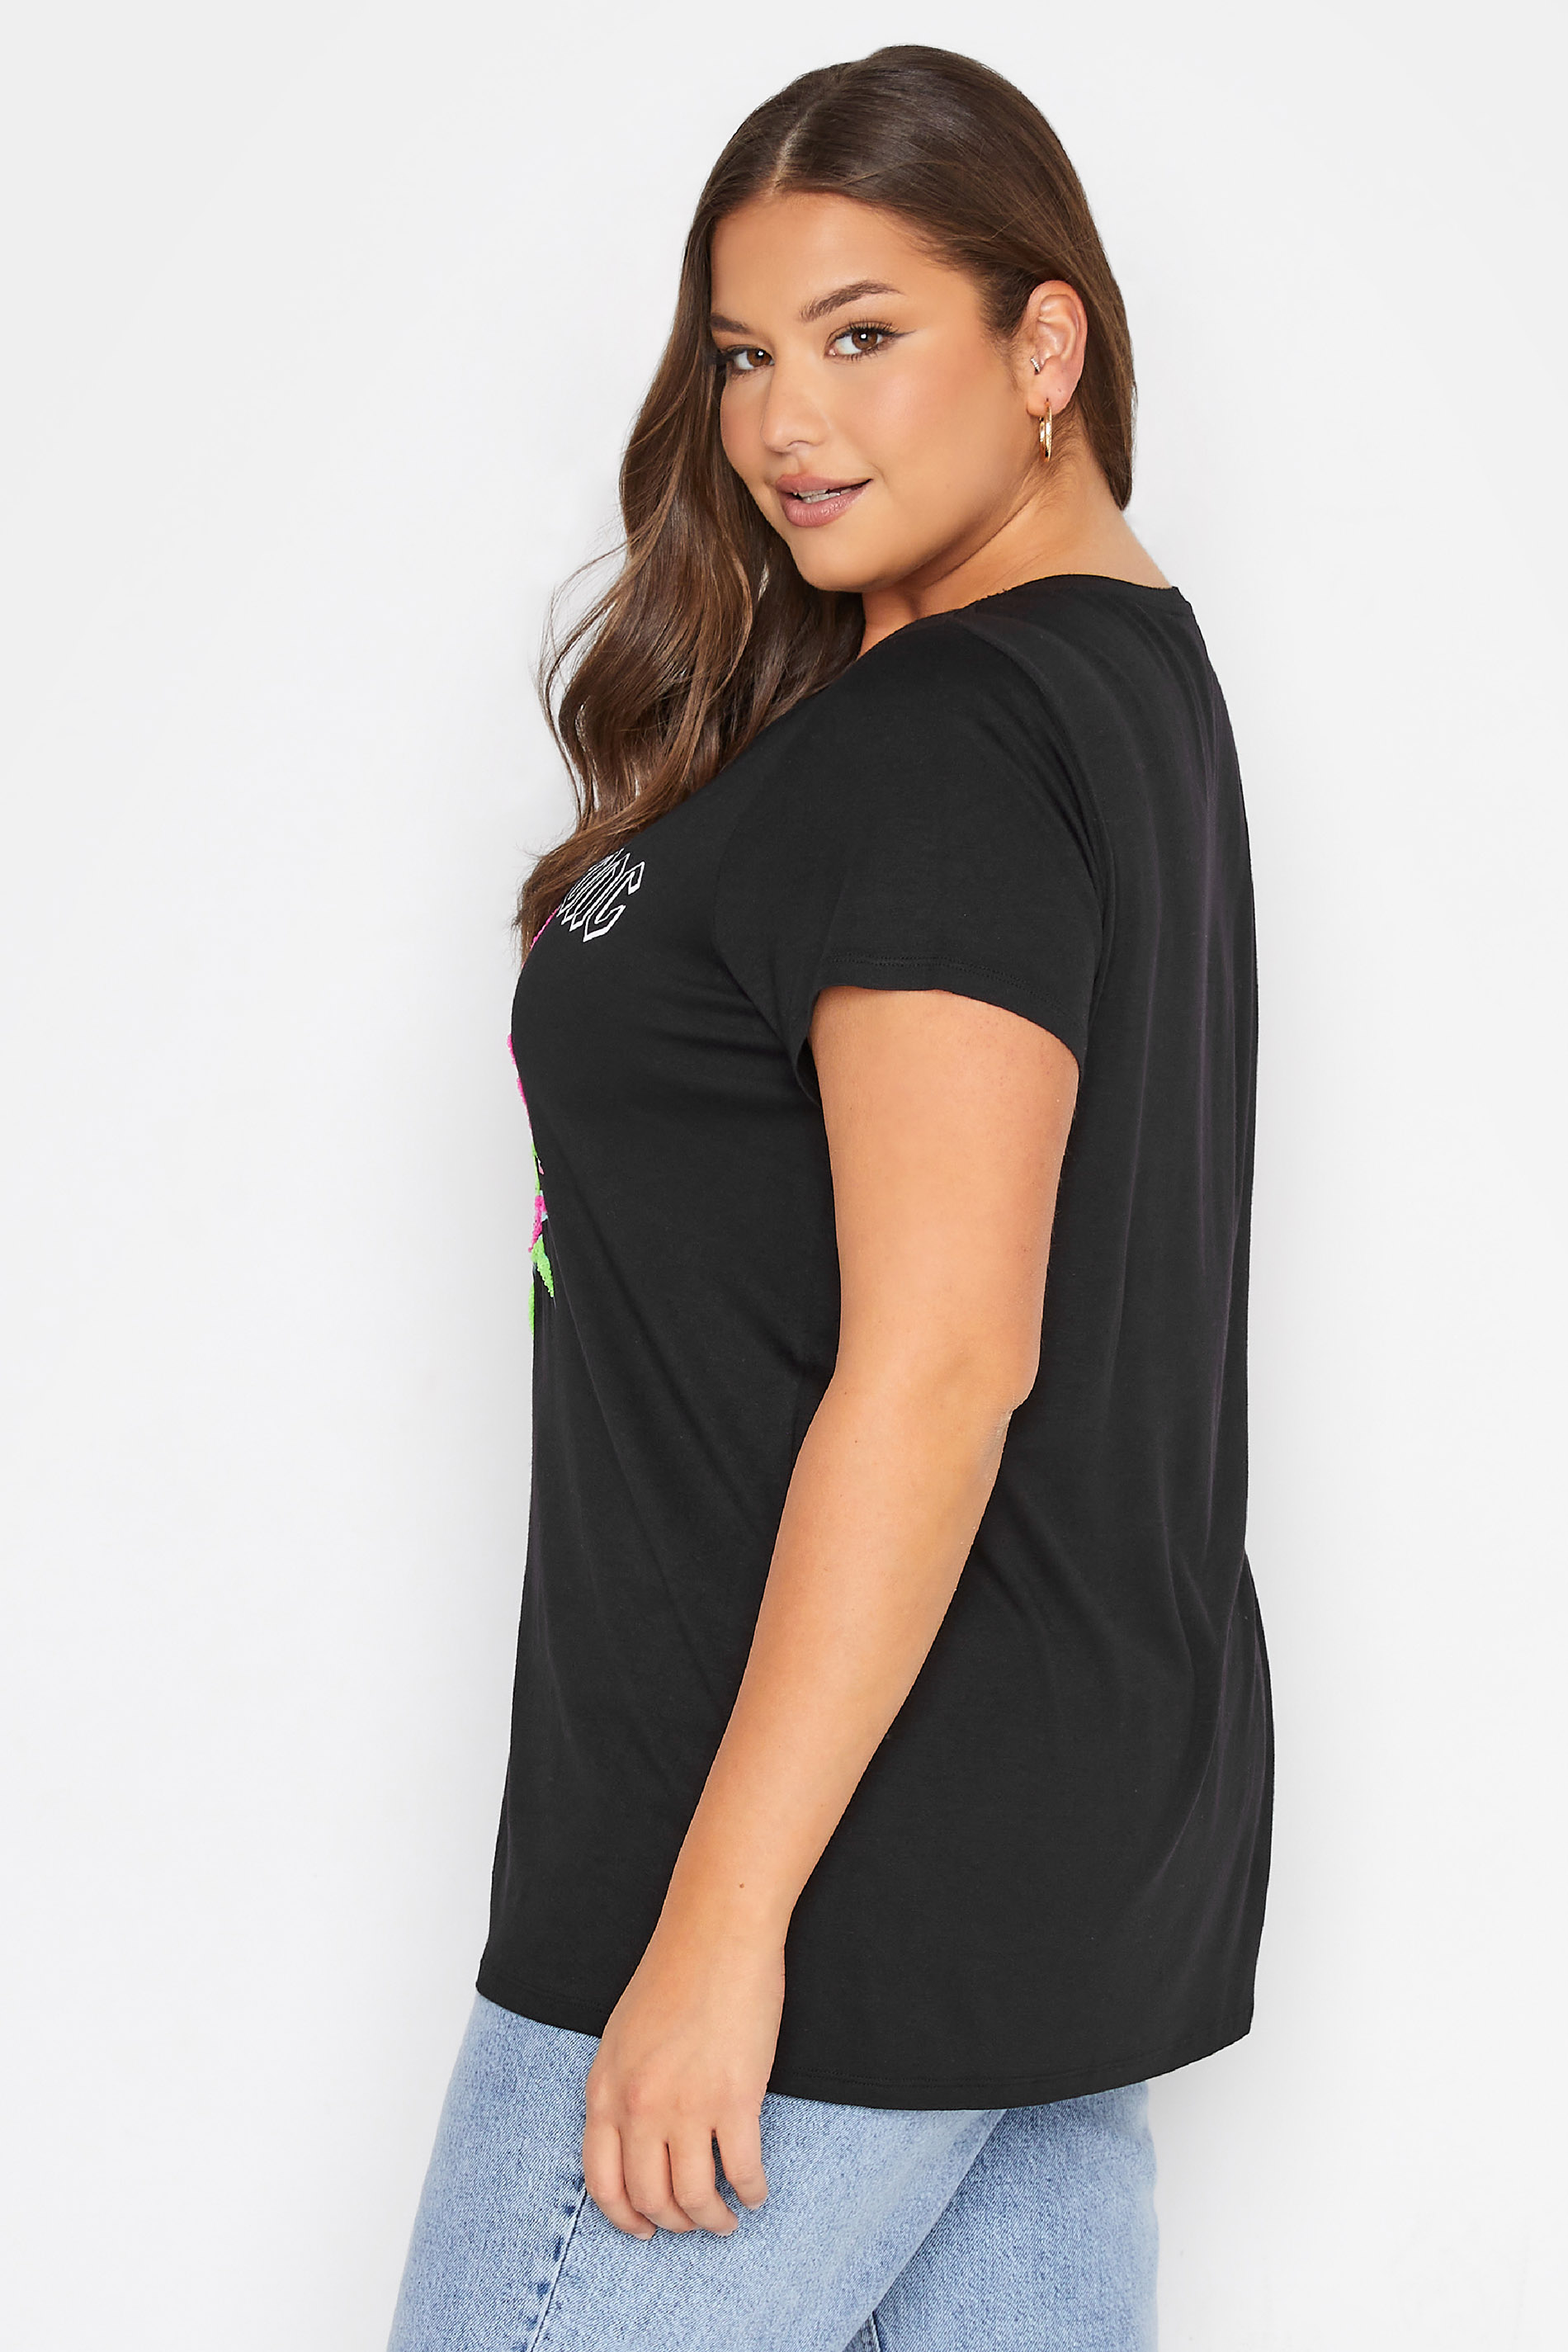 Grande taille  Tops Grande taille  T-Shirts | T-Shirt Noir en Jersey 'Wild and Strong' - TU98936